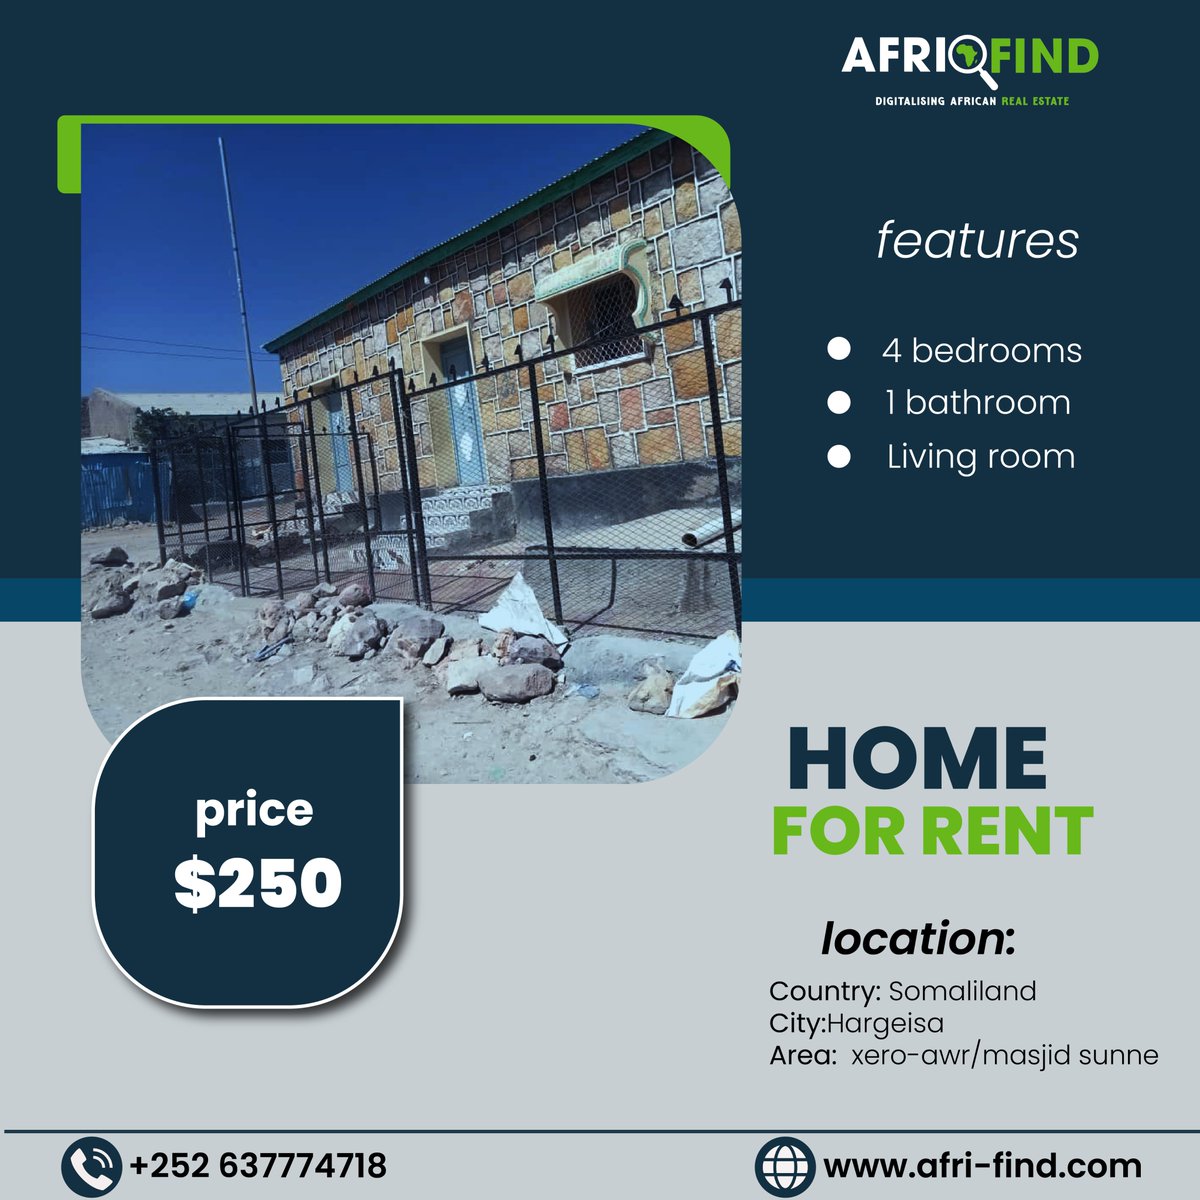 Property for rent in Somaliland Hargeisa Area of Xero-awr/Masjid sunne

Contact for more information:+252-63-7774718

#Guri-kiro ah
#somalia
#xero-awr
#Somaliland
#RealEstate
#ForSale
#african
#PropertyForRent
#afri-find